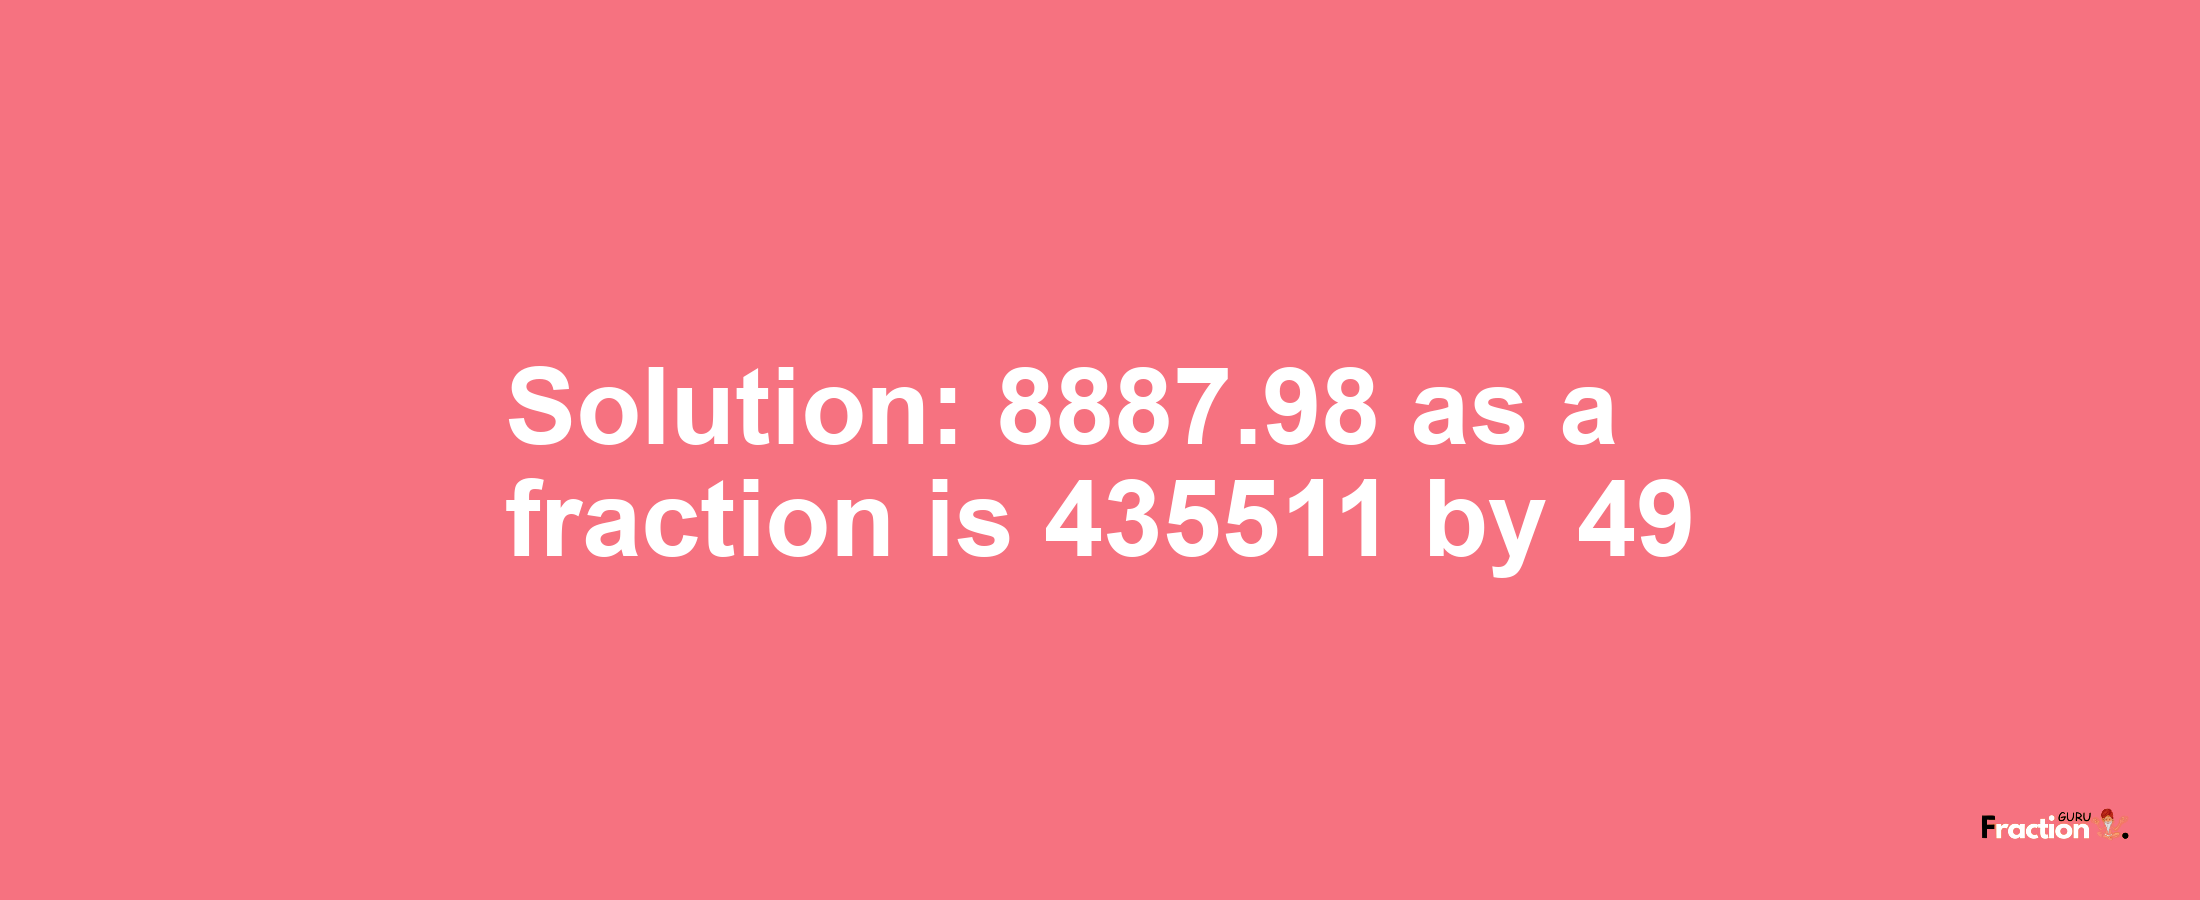 Solution:8887.98 as a fraction is 435511/49